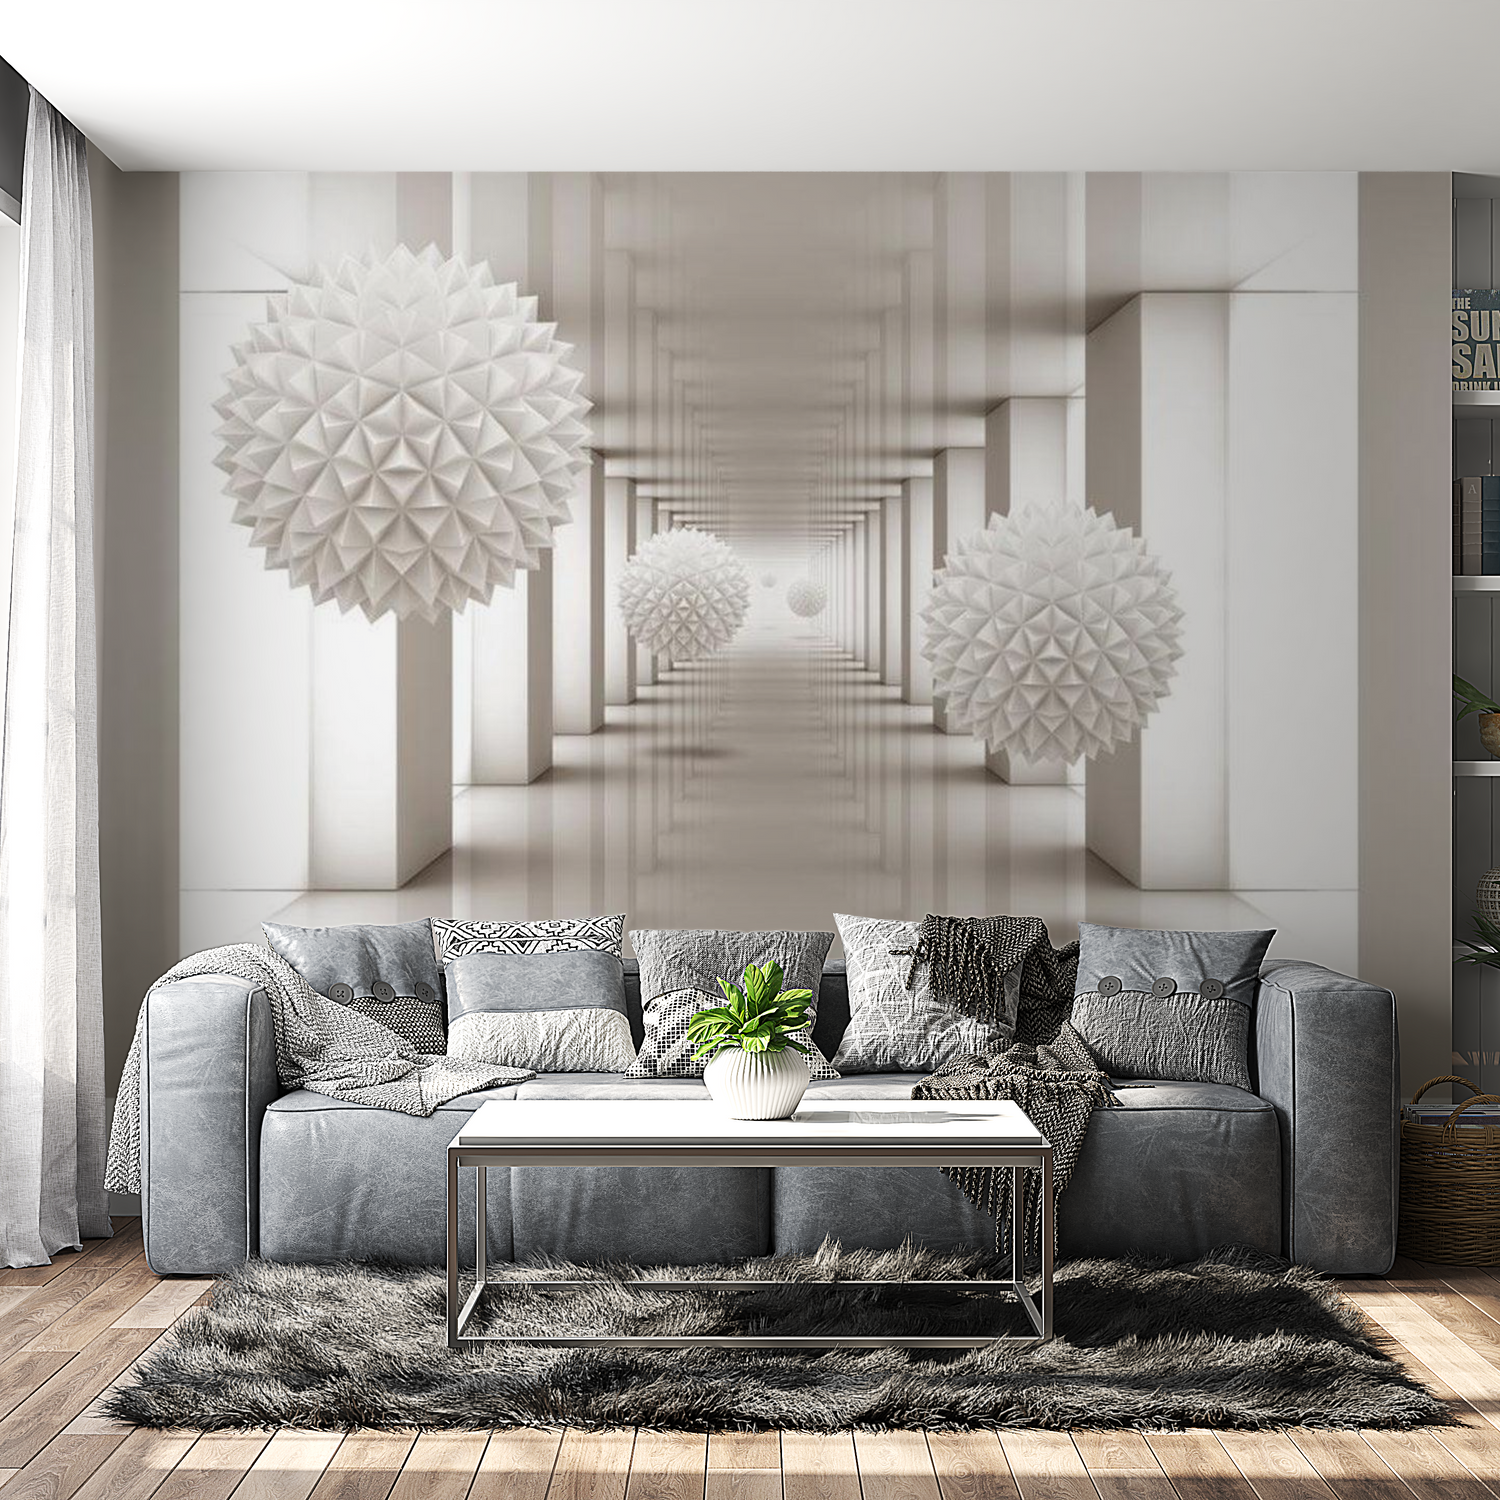 3D Illusion Wallpaper Wall Mural - Gateway To The Future 39"Wx27"H